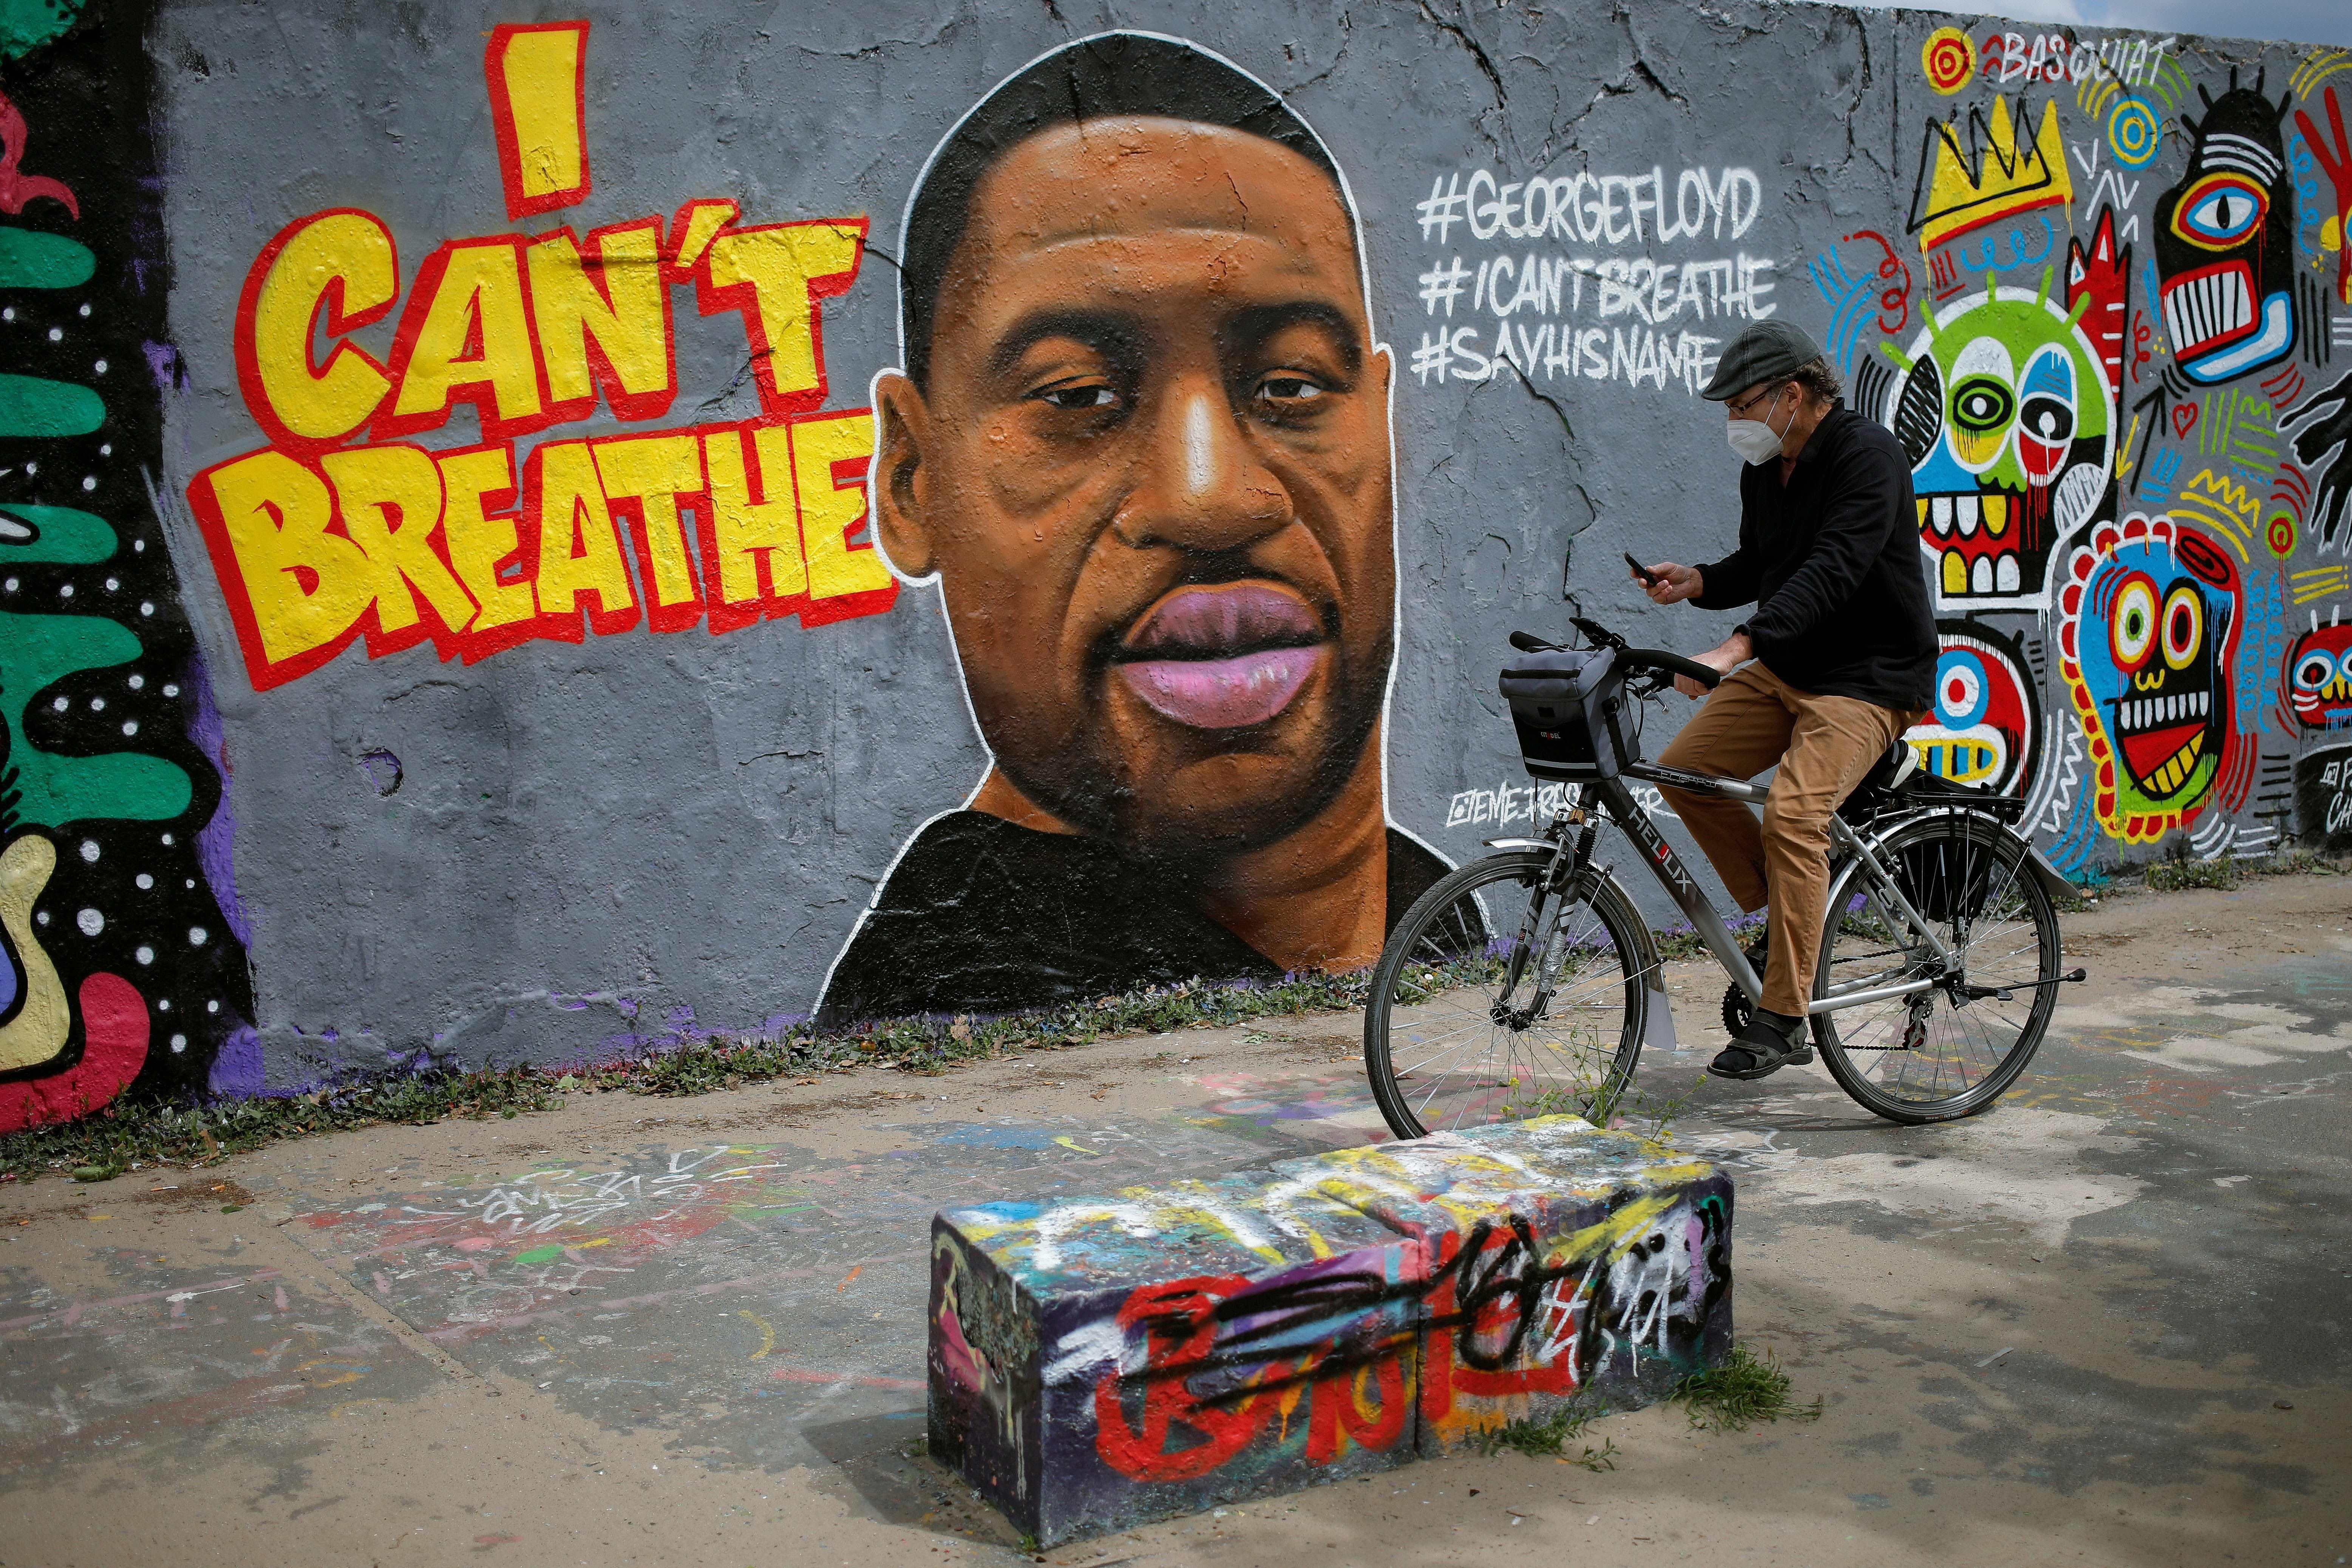 A man wearing a face mask looks at his phone as he cycles passed a graffiti on a wall depicting a portrait of George Floyd, a black man who died in Minneapolis after a white policeman kneeled on his neck for several minutes, is seen on a wall at Mauer Park in Berlin's Prenzlauer Berg district on May 30, 2020. 